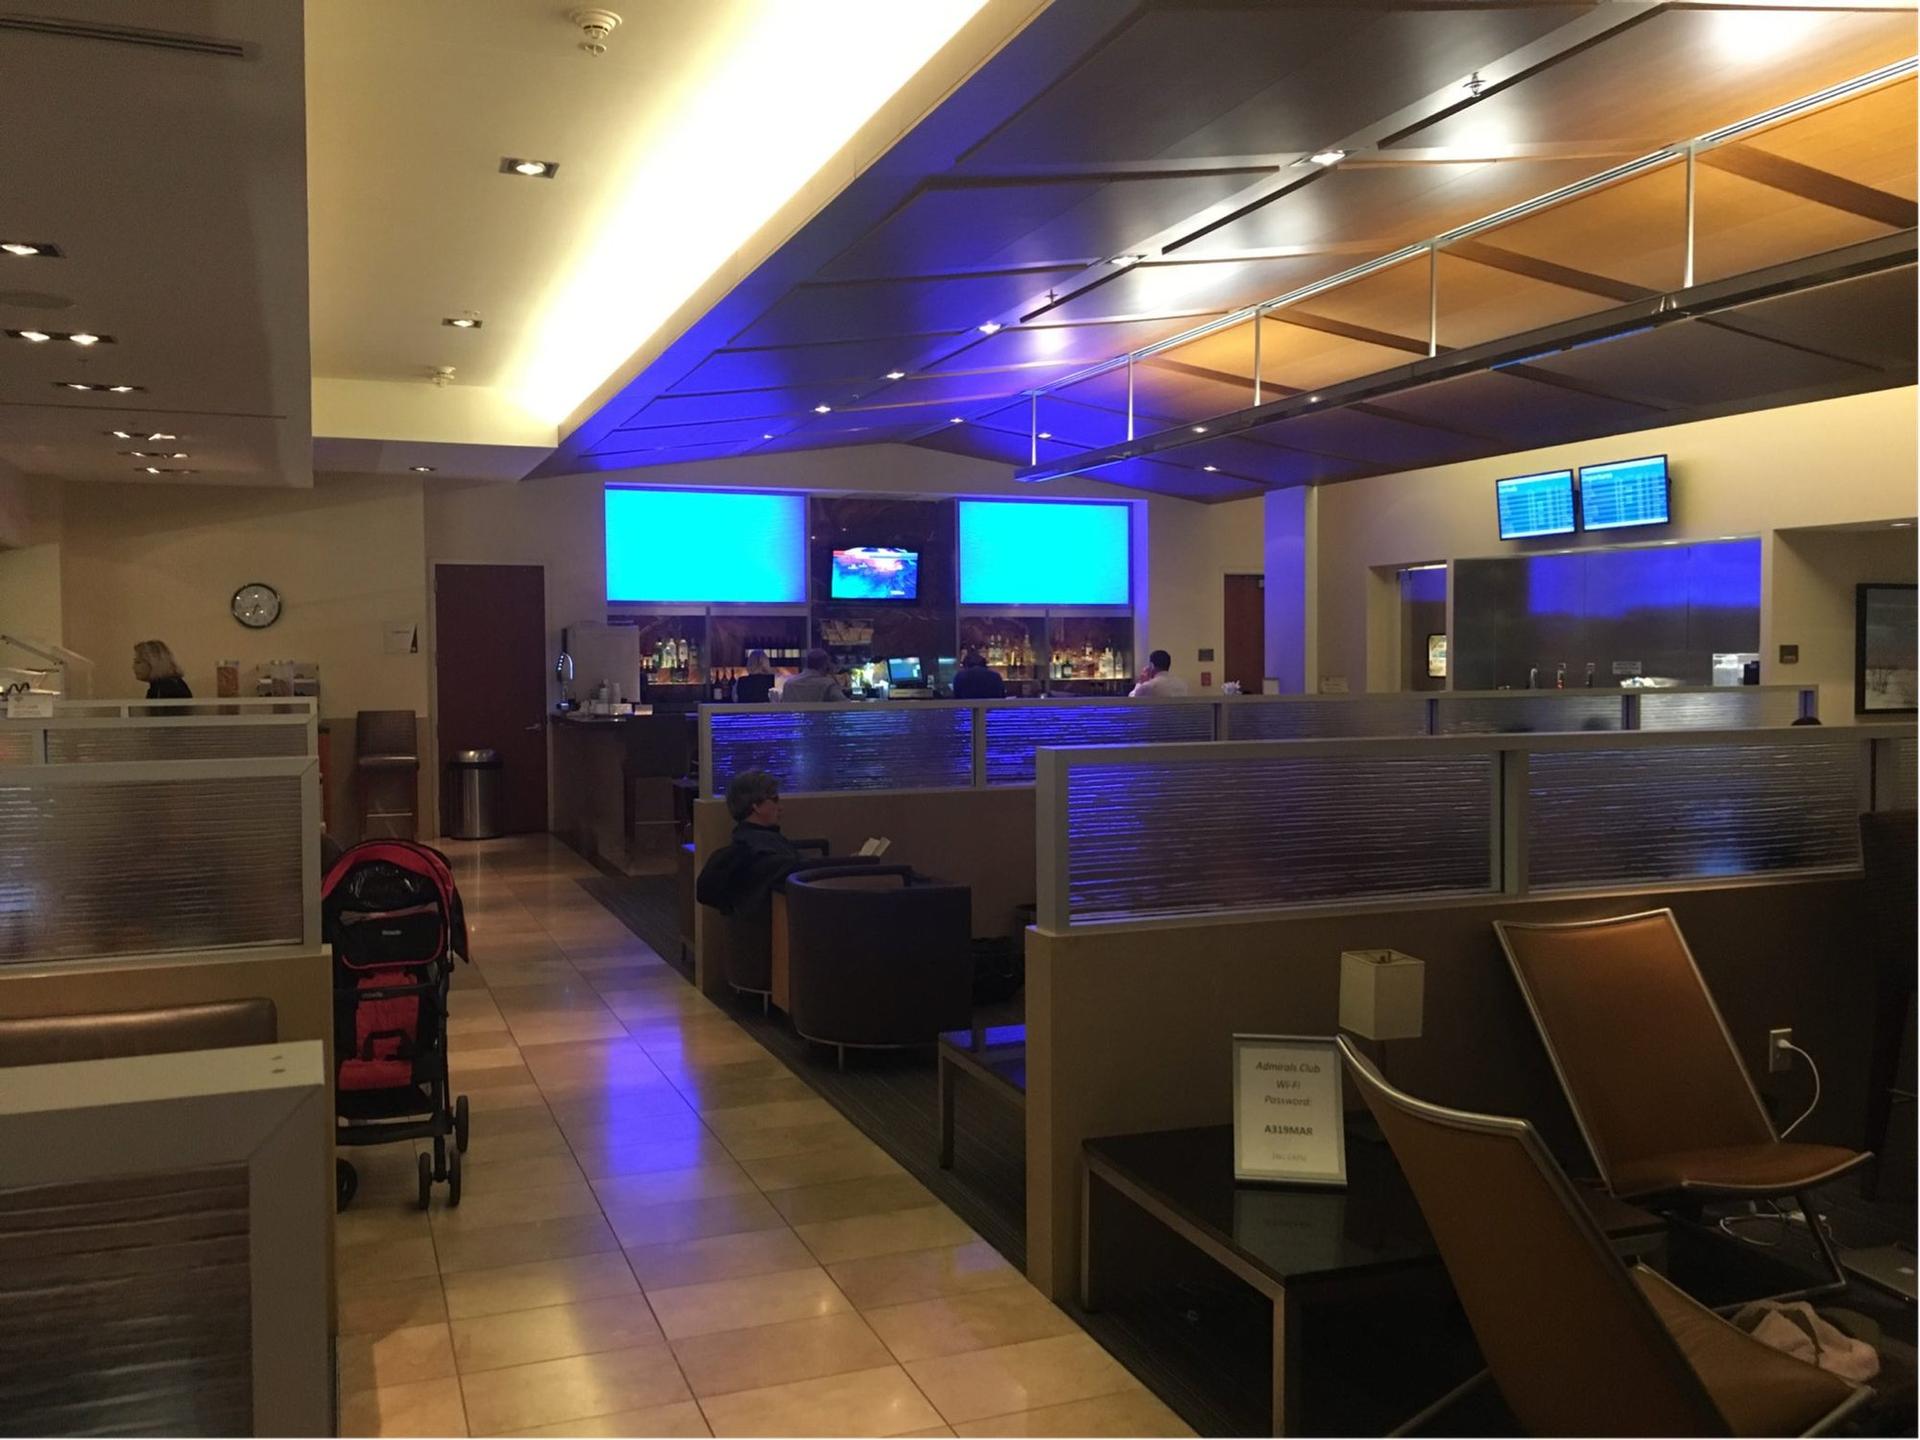 American Airlines Admirals Club image 28 of 31